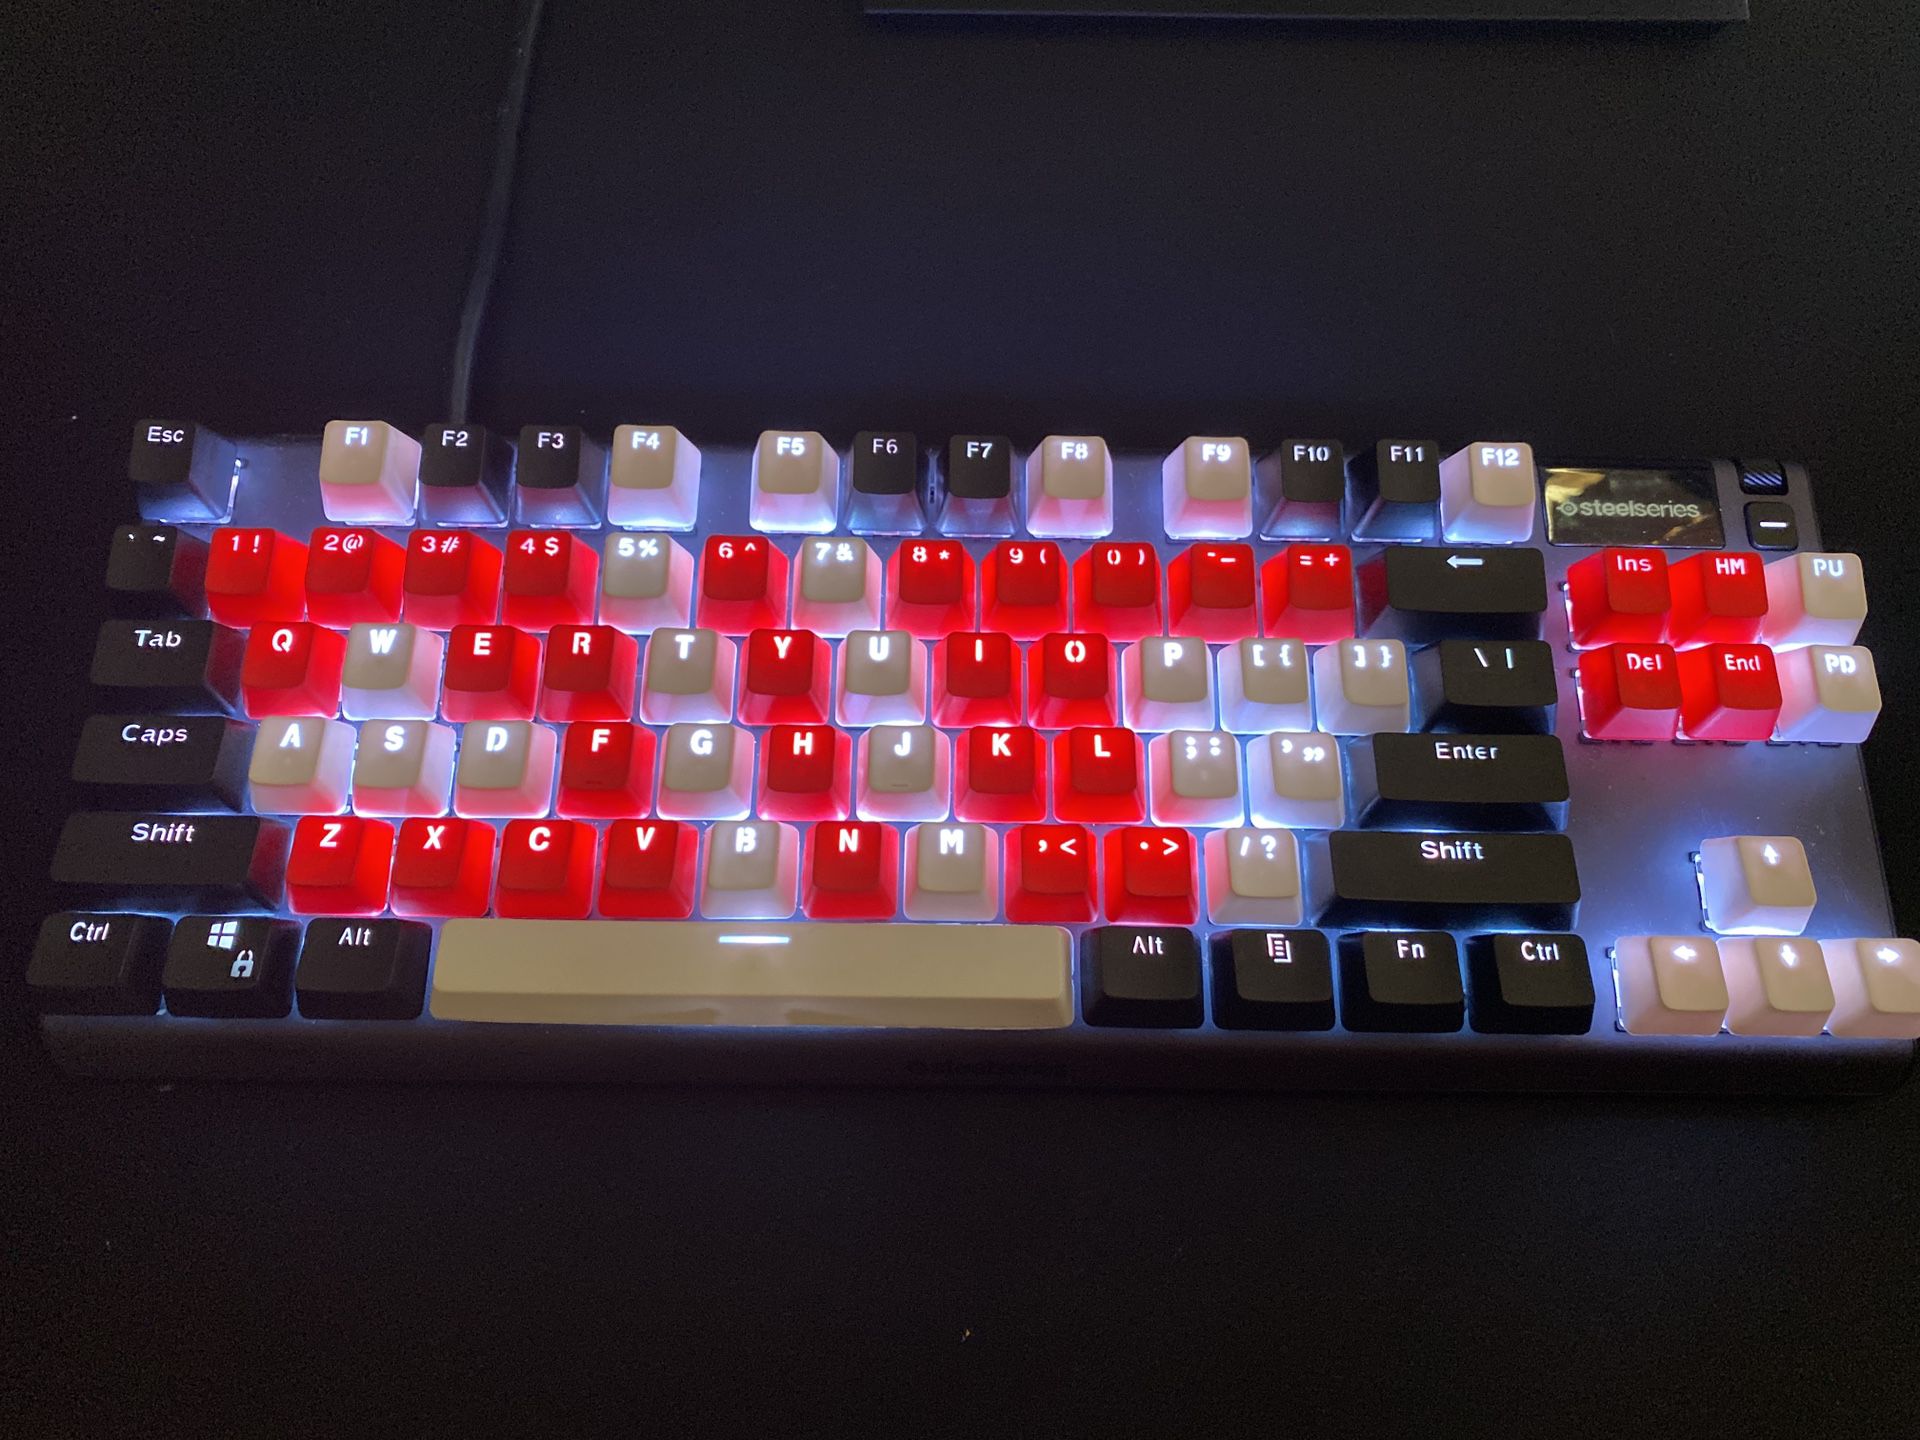 Steel Series Apex Pro Tkl With Custom Keycaps And Original Keycaps For Sale In Hercules Ca Offerup